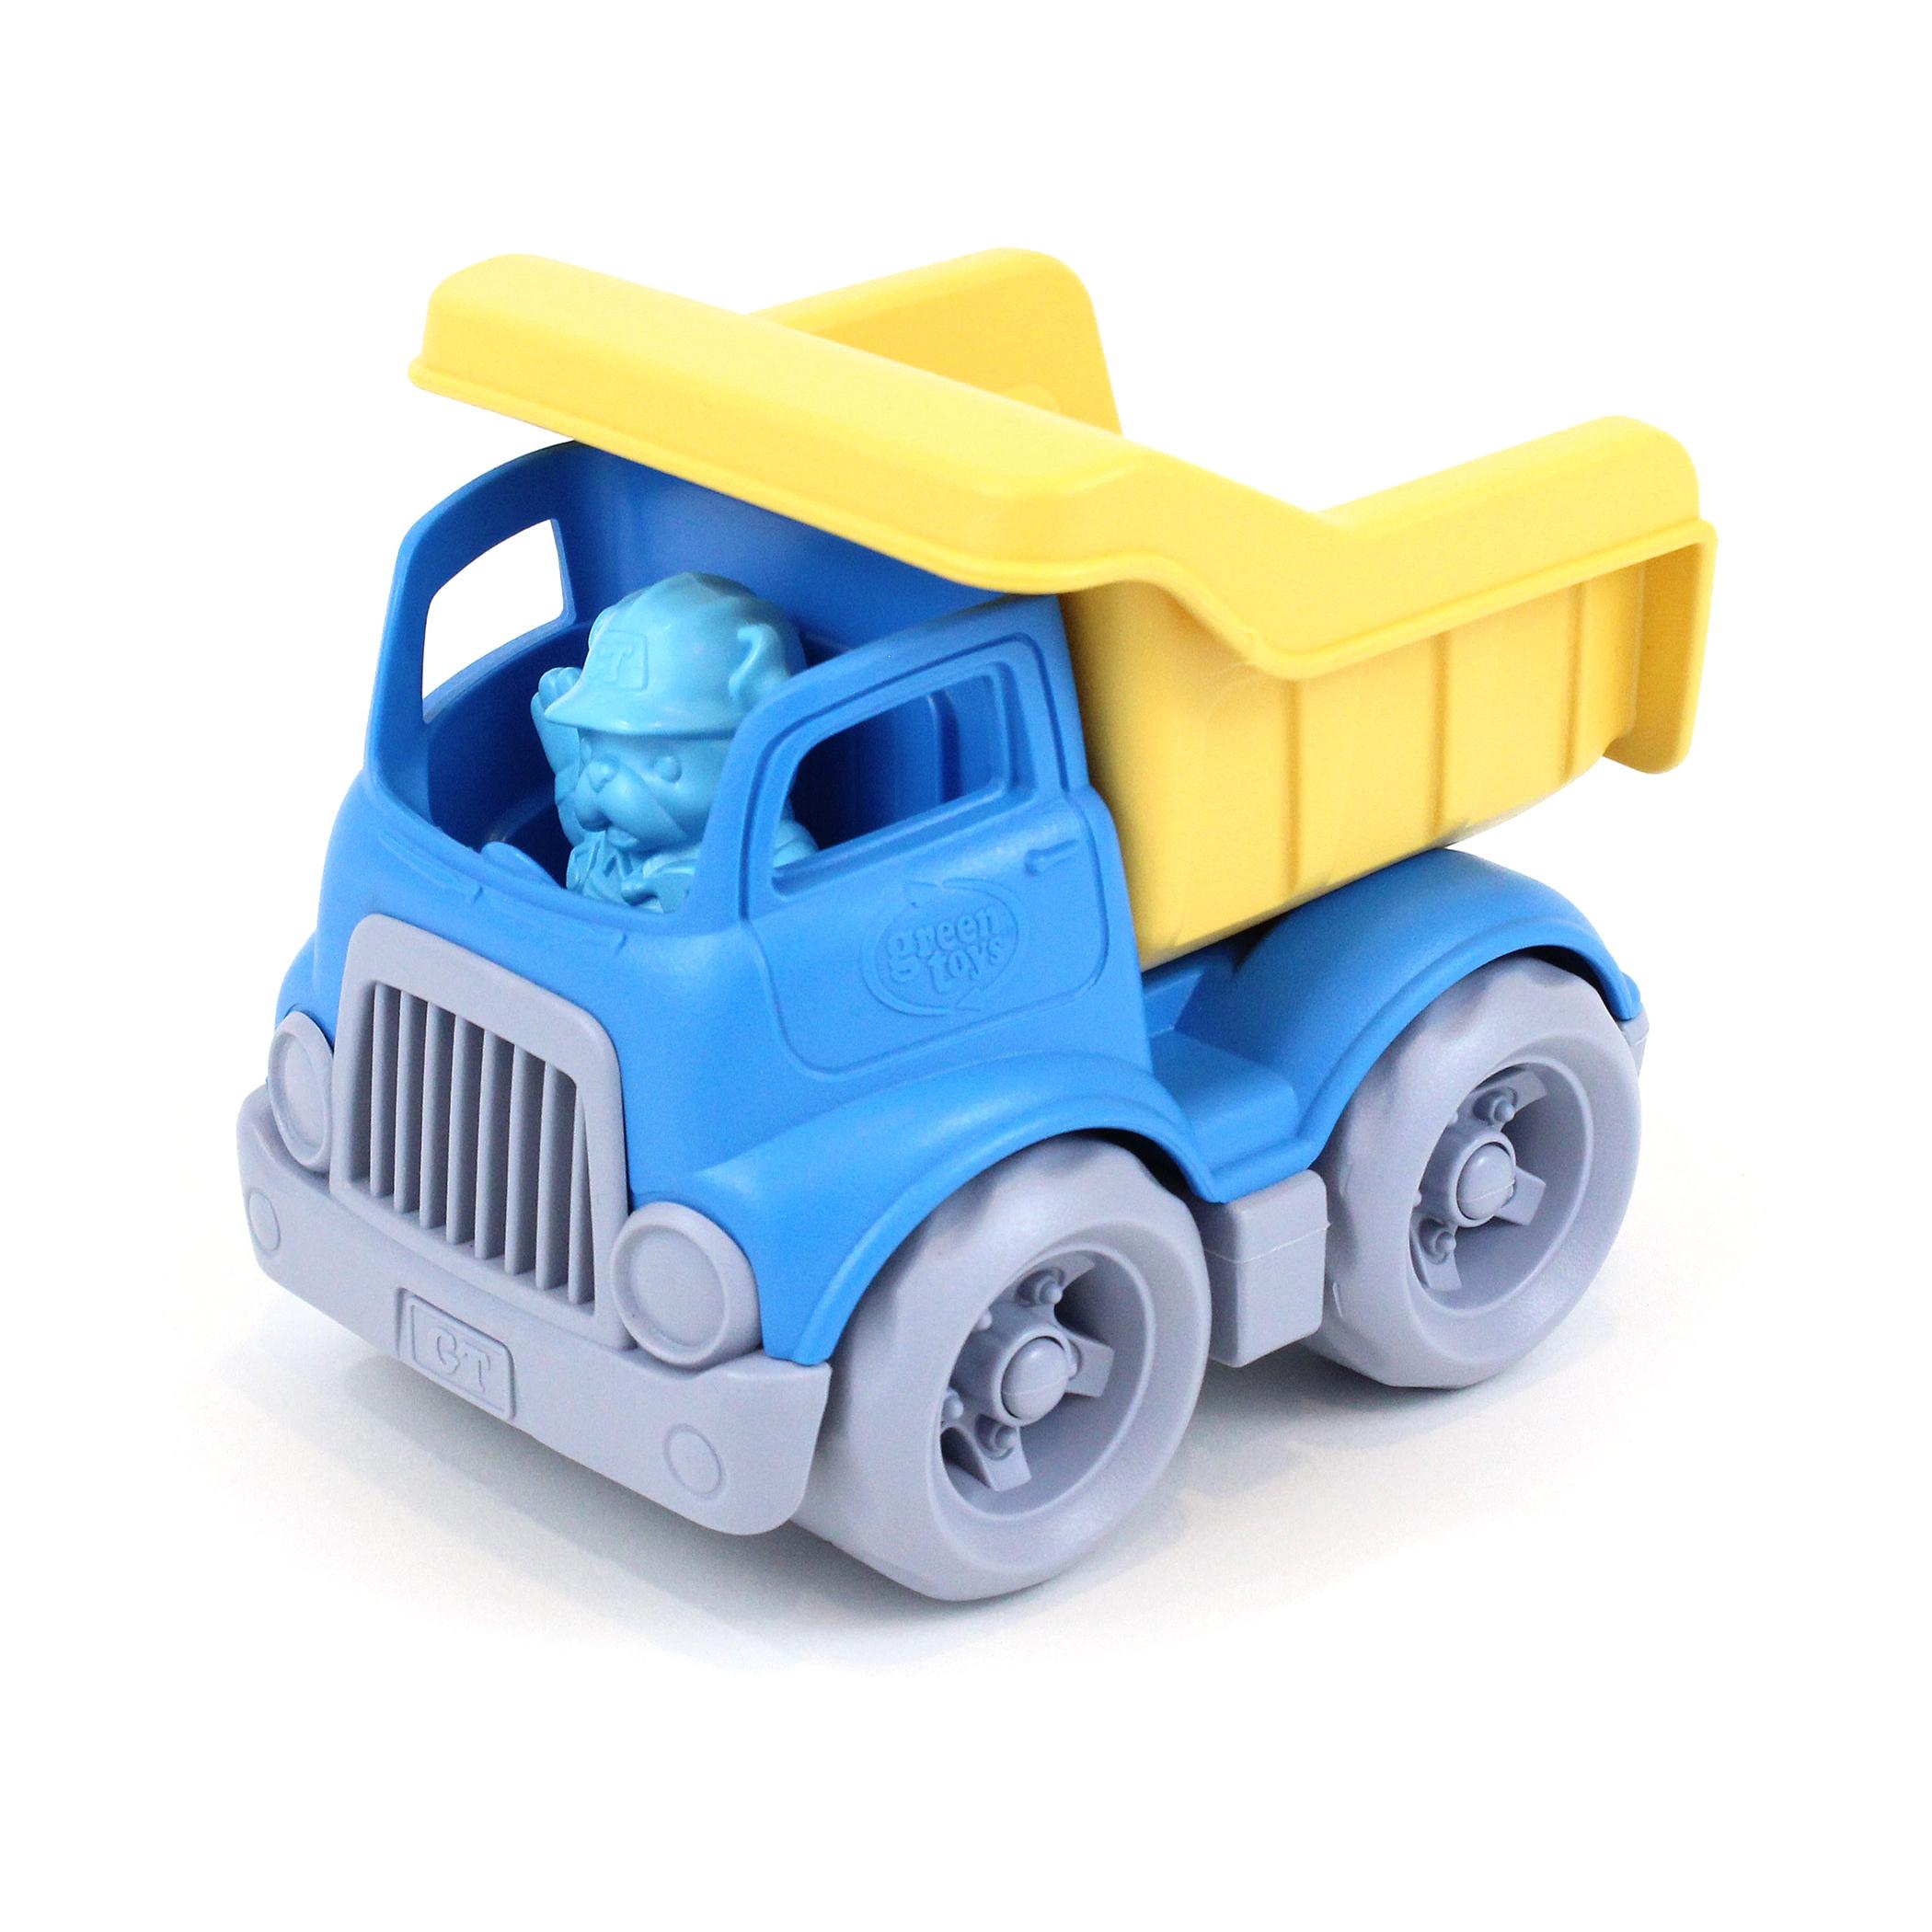  Recycled Plastic Dumper Toy